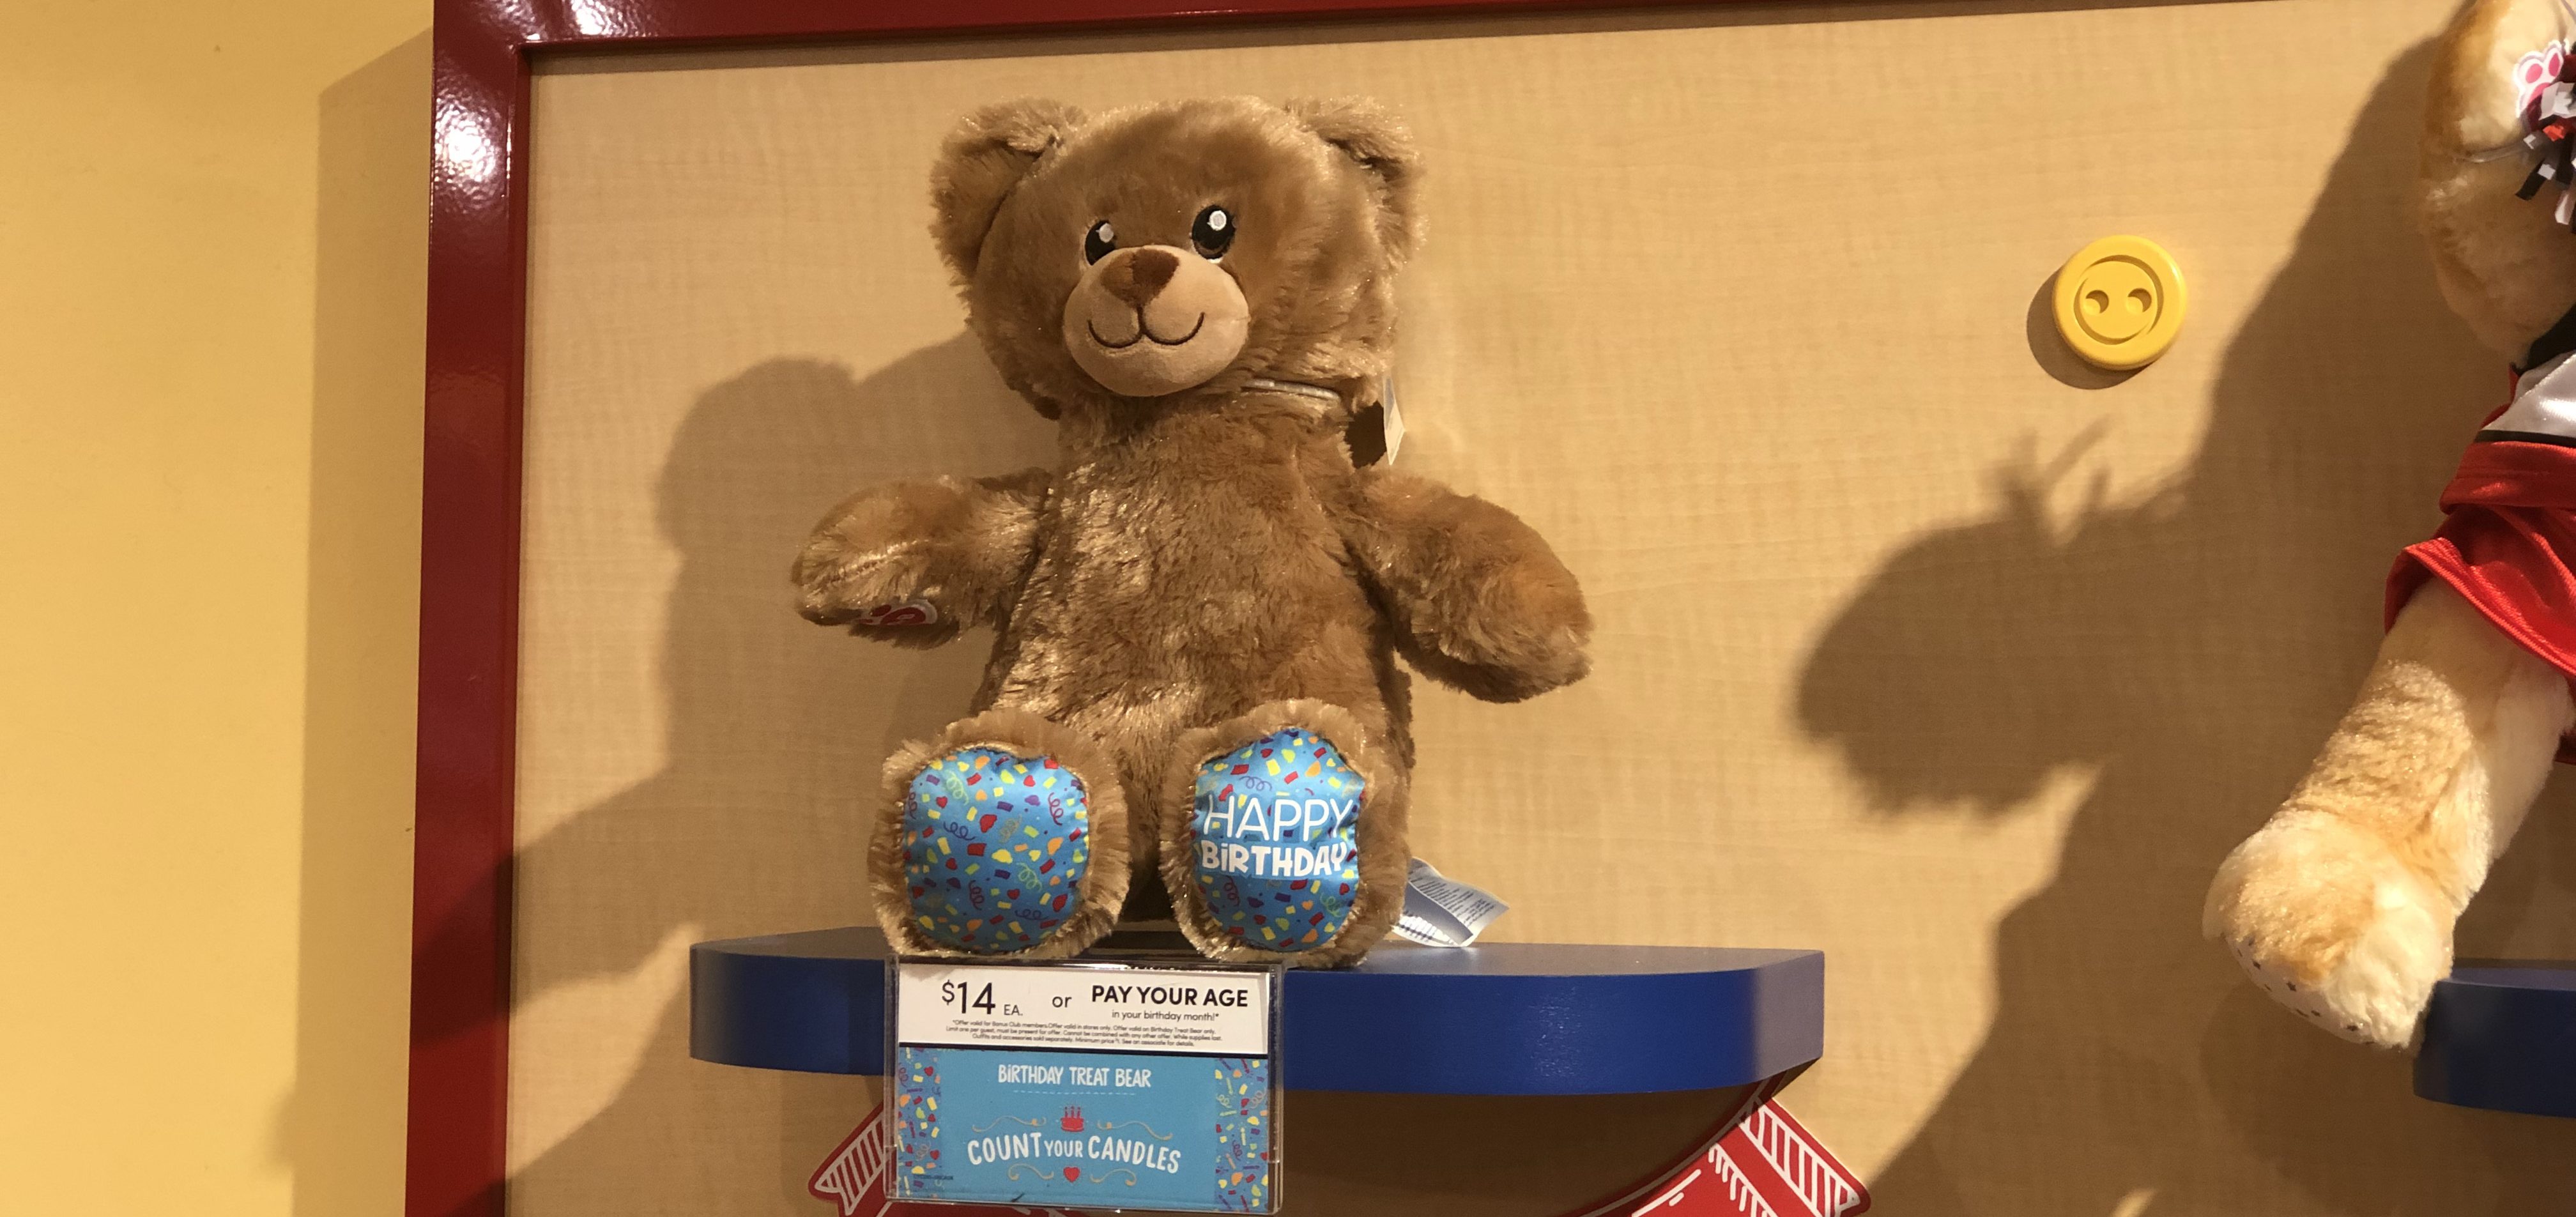 BuildABear Count Your Candles Program Pay Your Age for Birthday Bear During Birthday Month